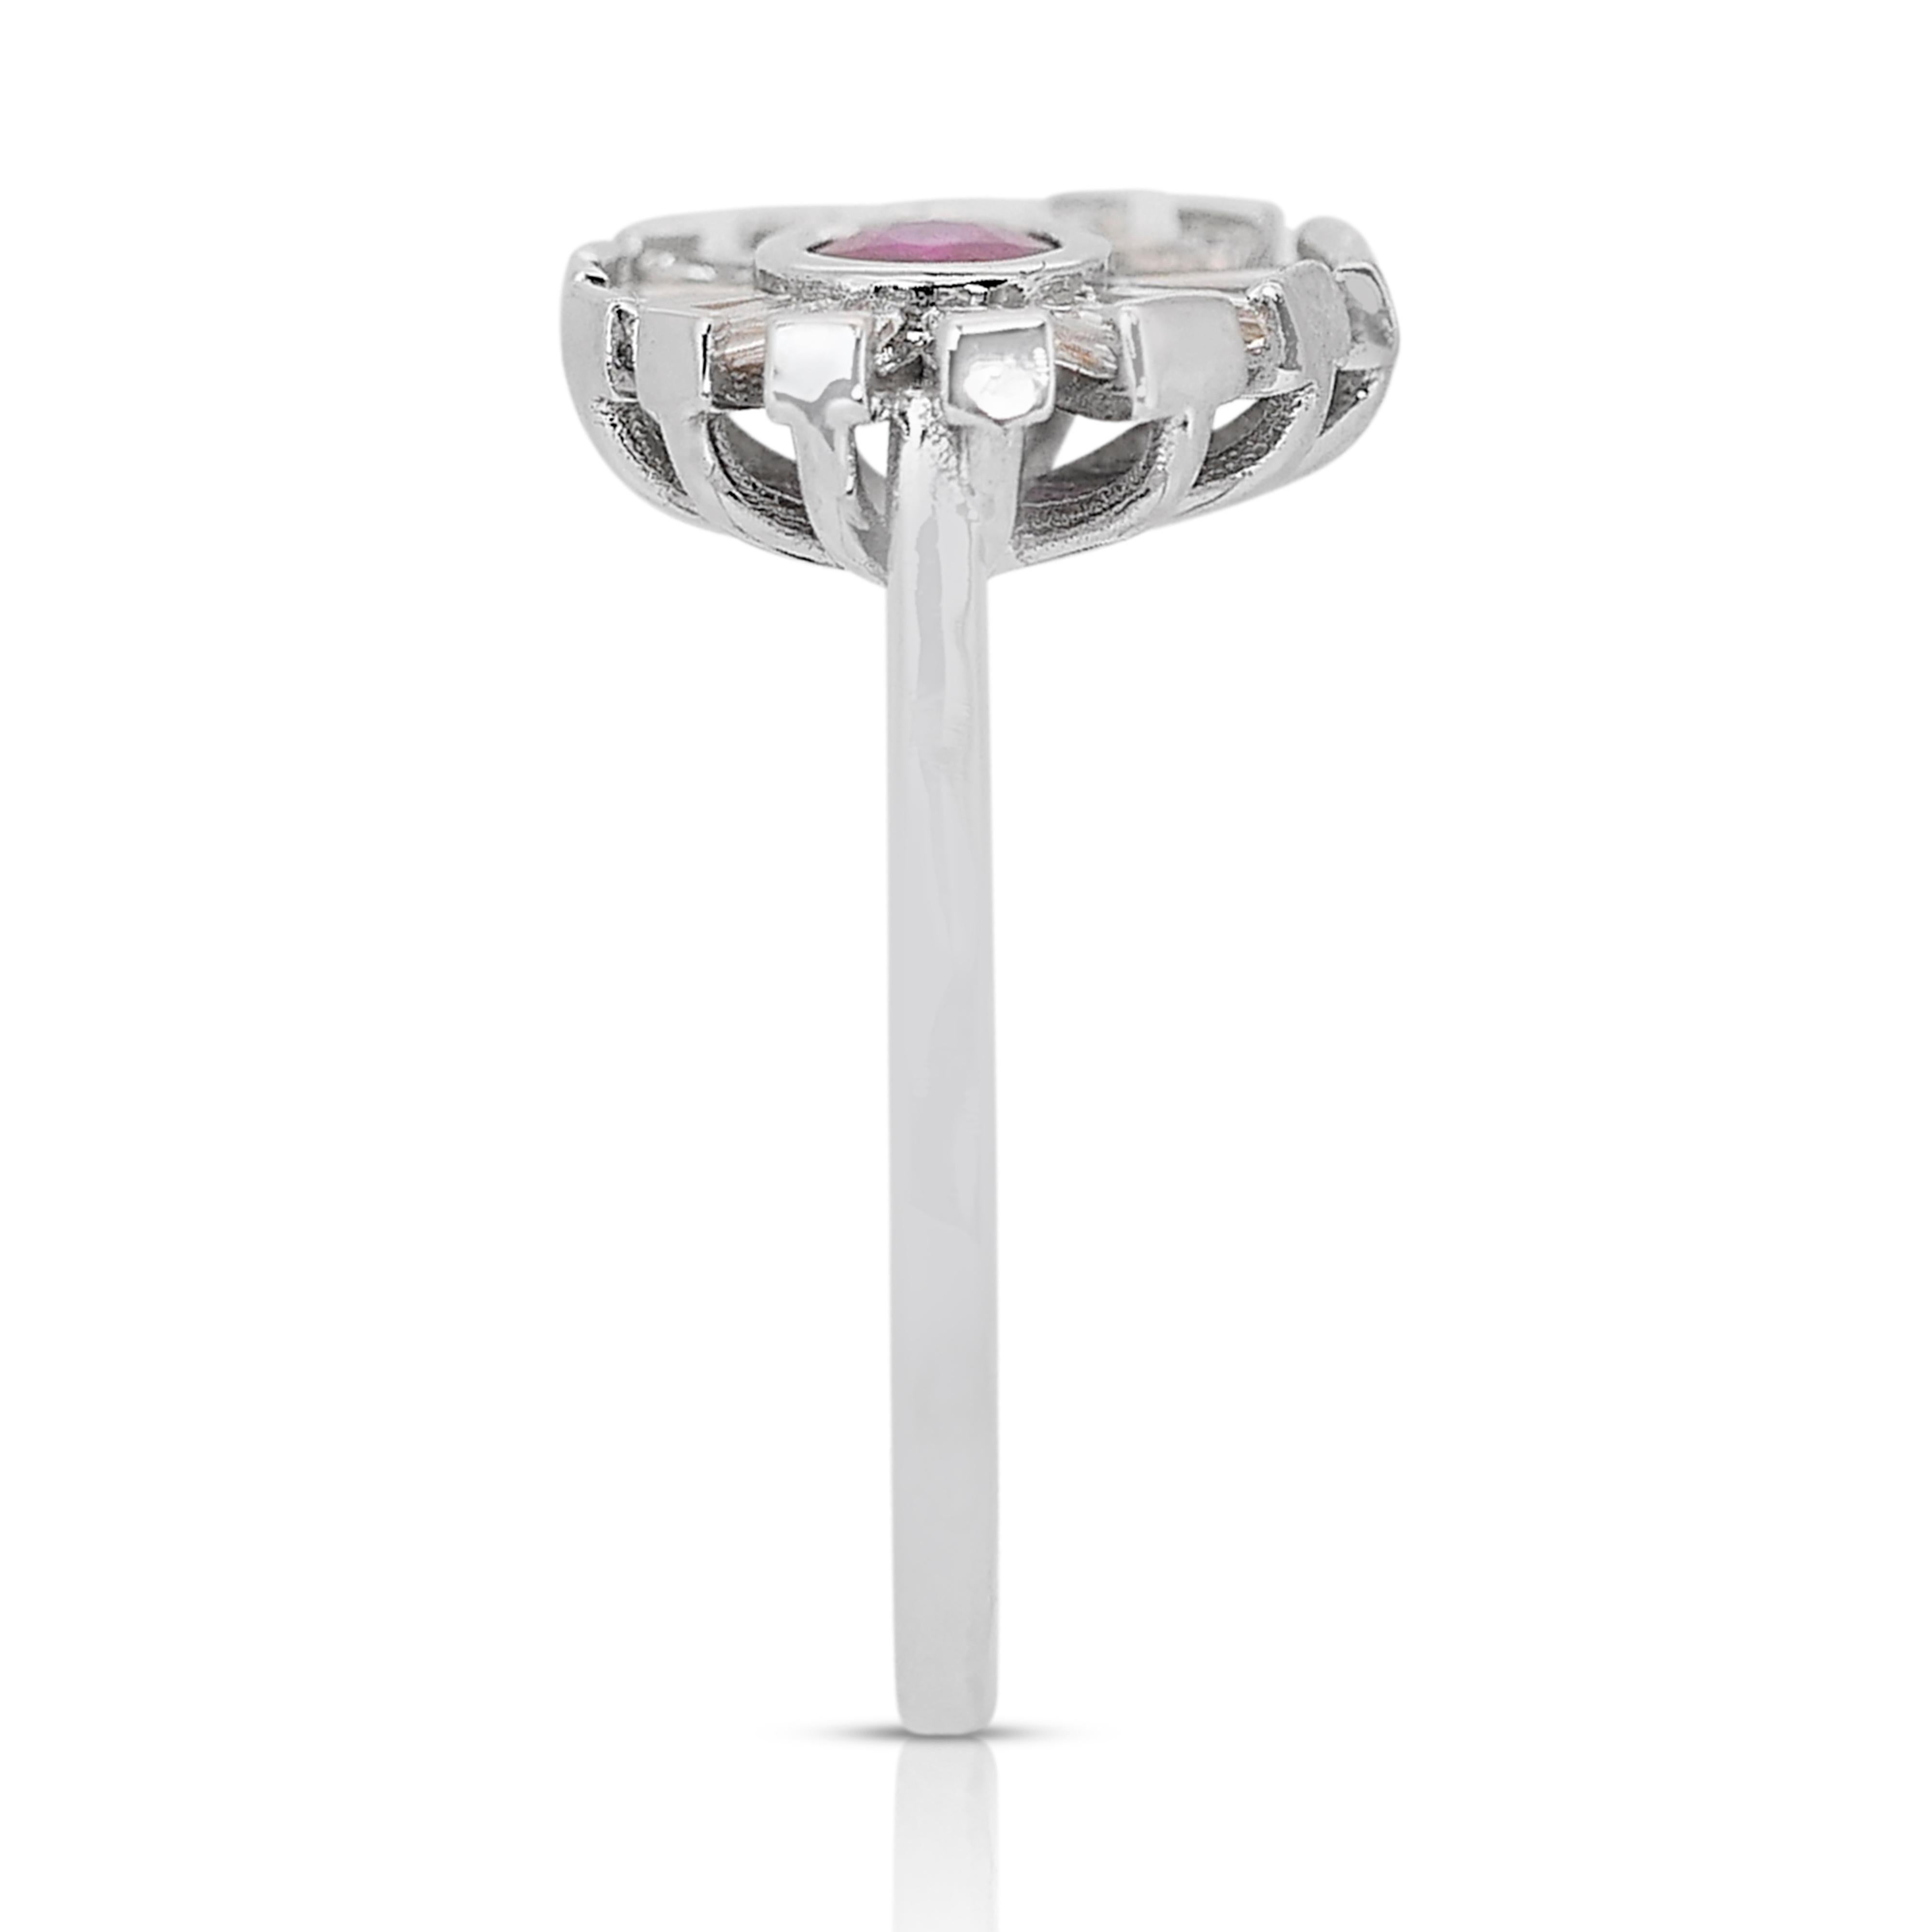 Stunning 1.20ct Ruby and Diamonds Halo Ring in 18k White Gold - IGI Certified For Sale 2